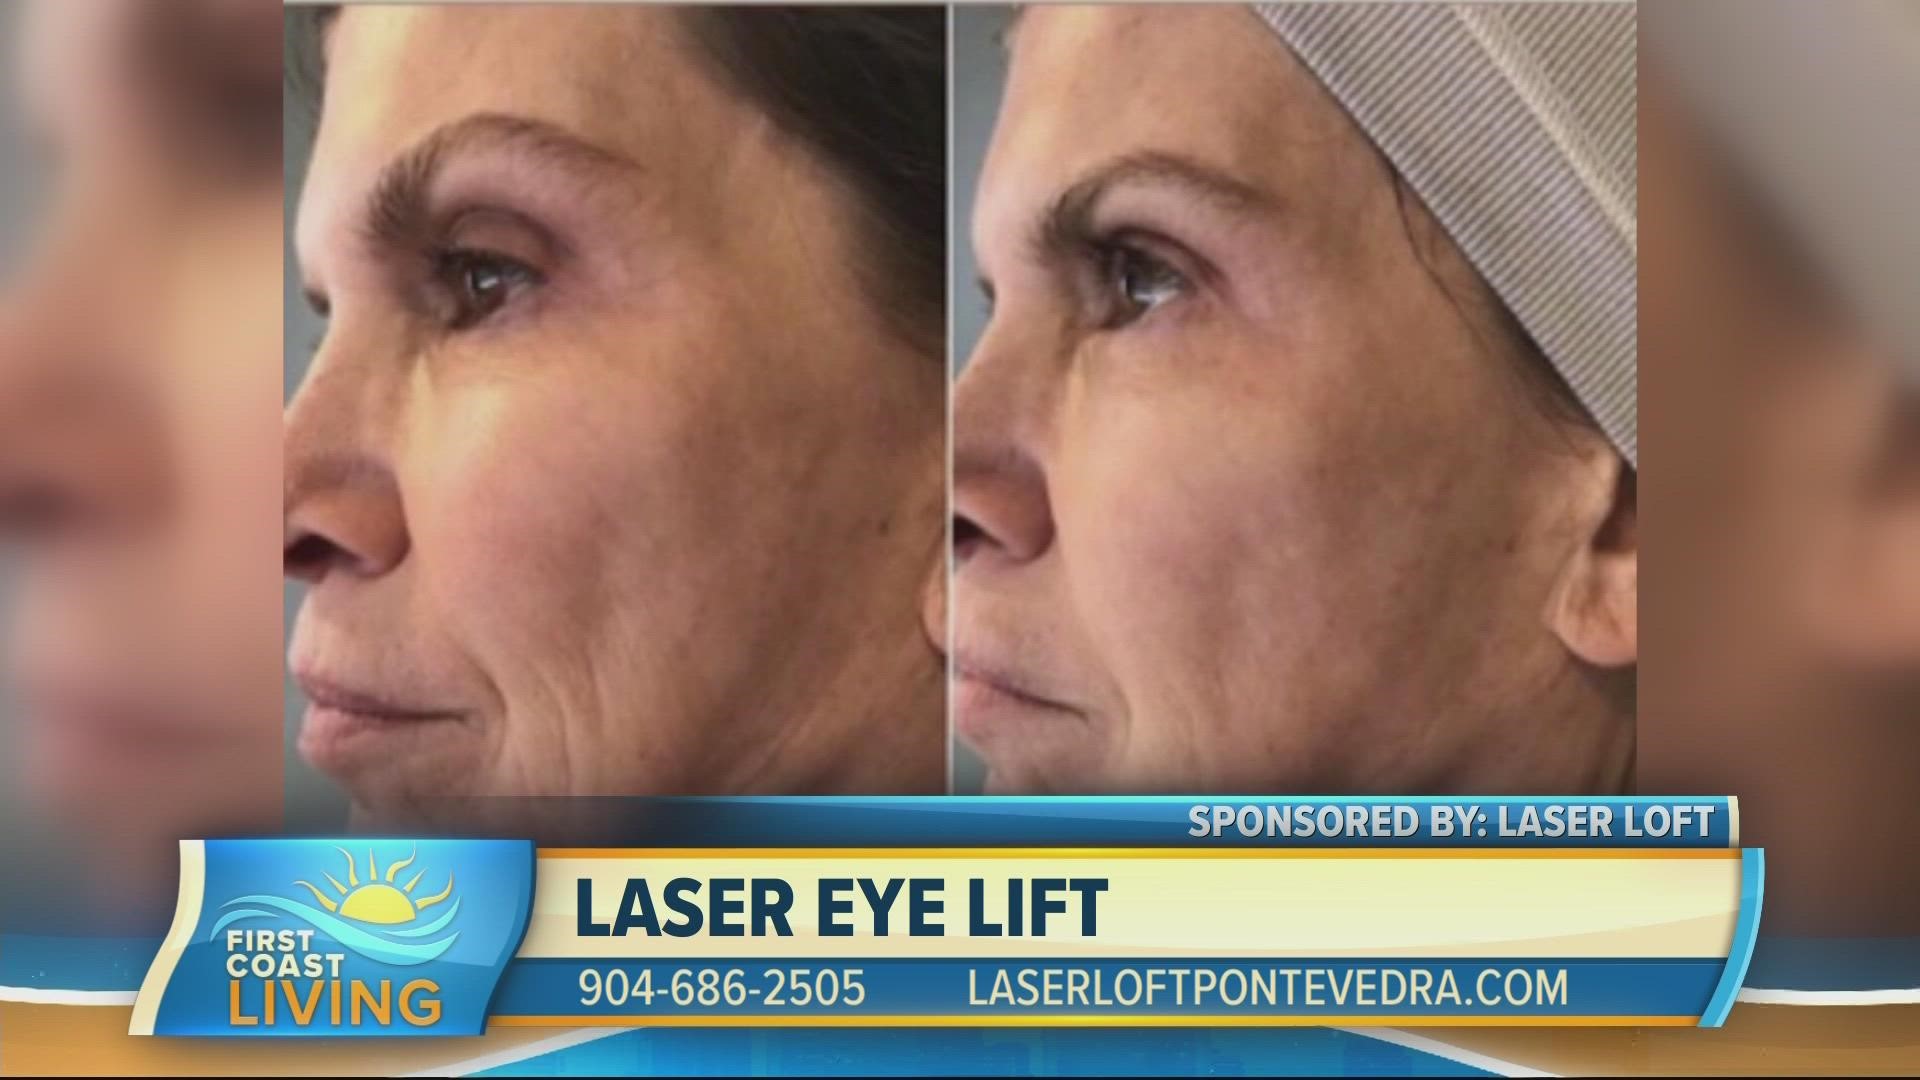 Laser Loft offers a procedure that targets the various signs of aging around our eyes.